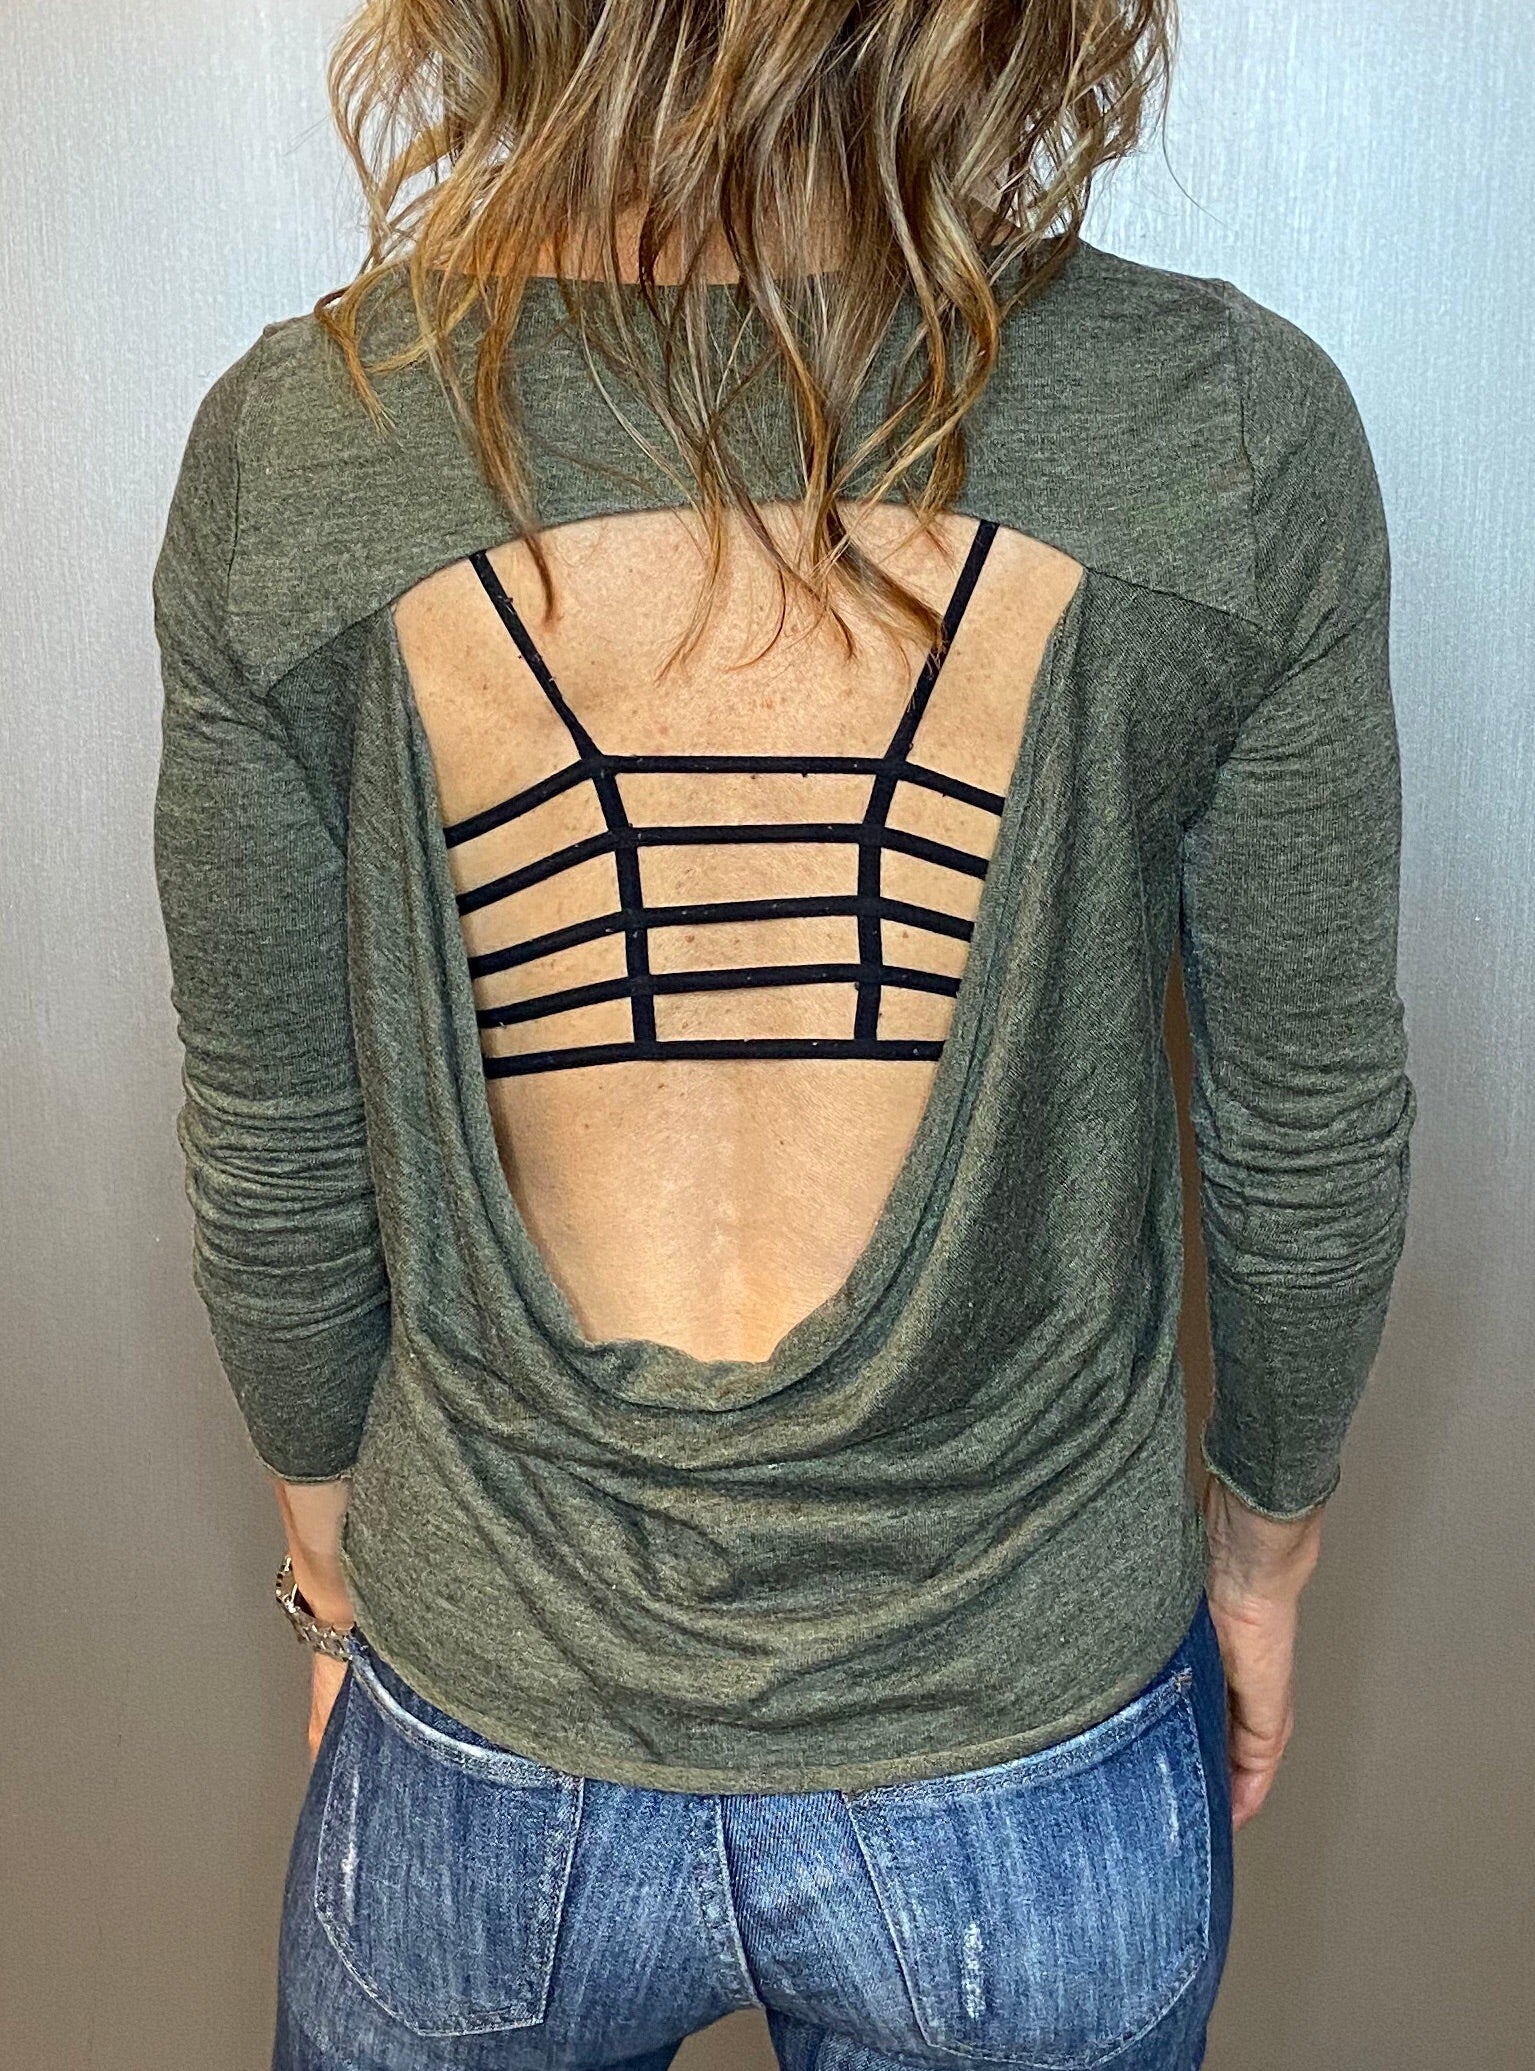 Cut out top